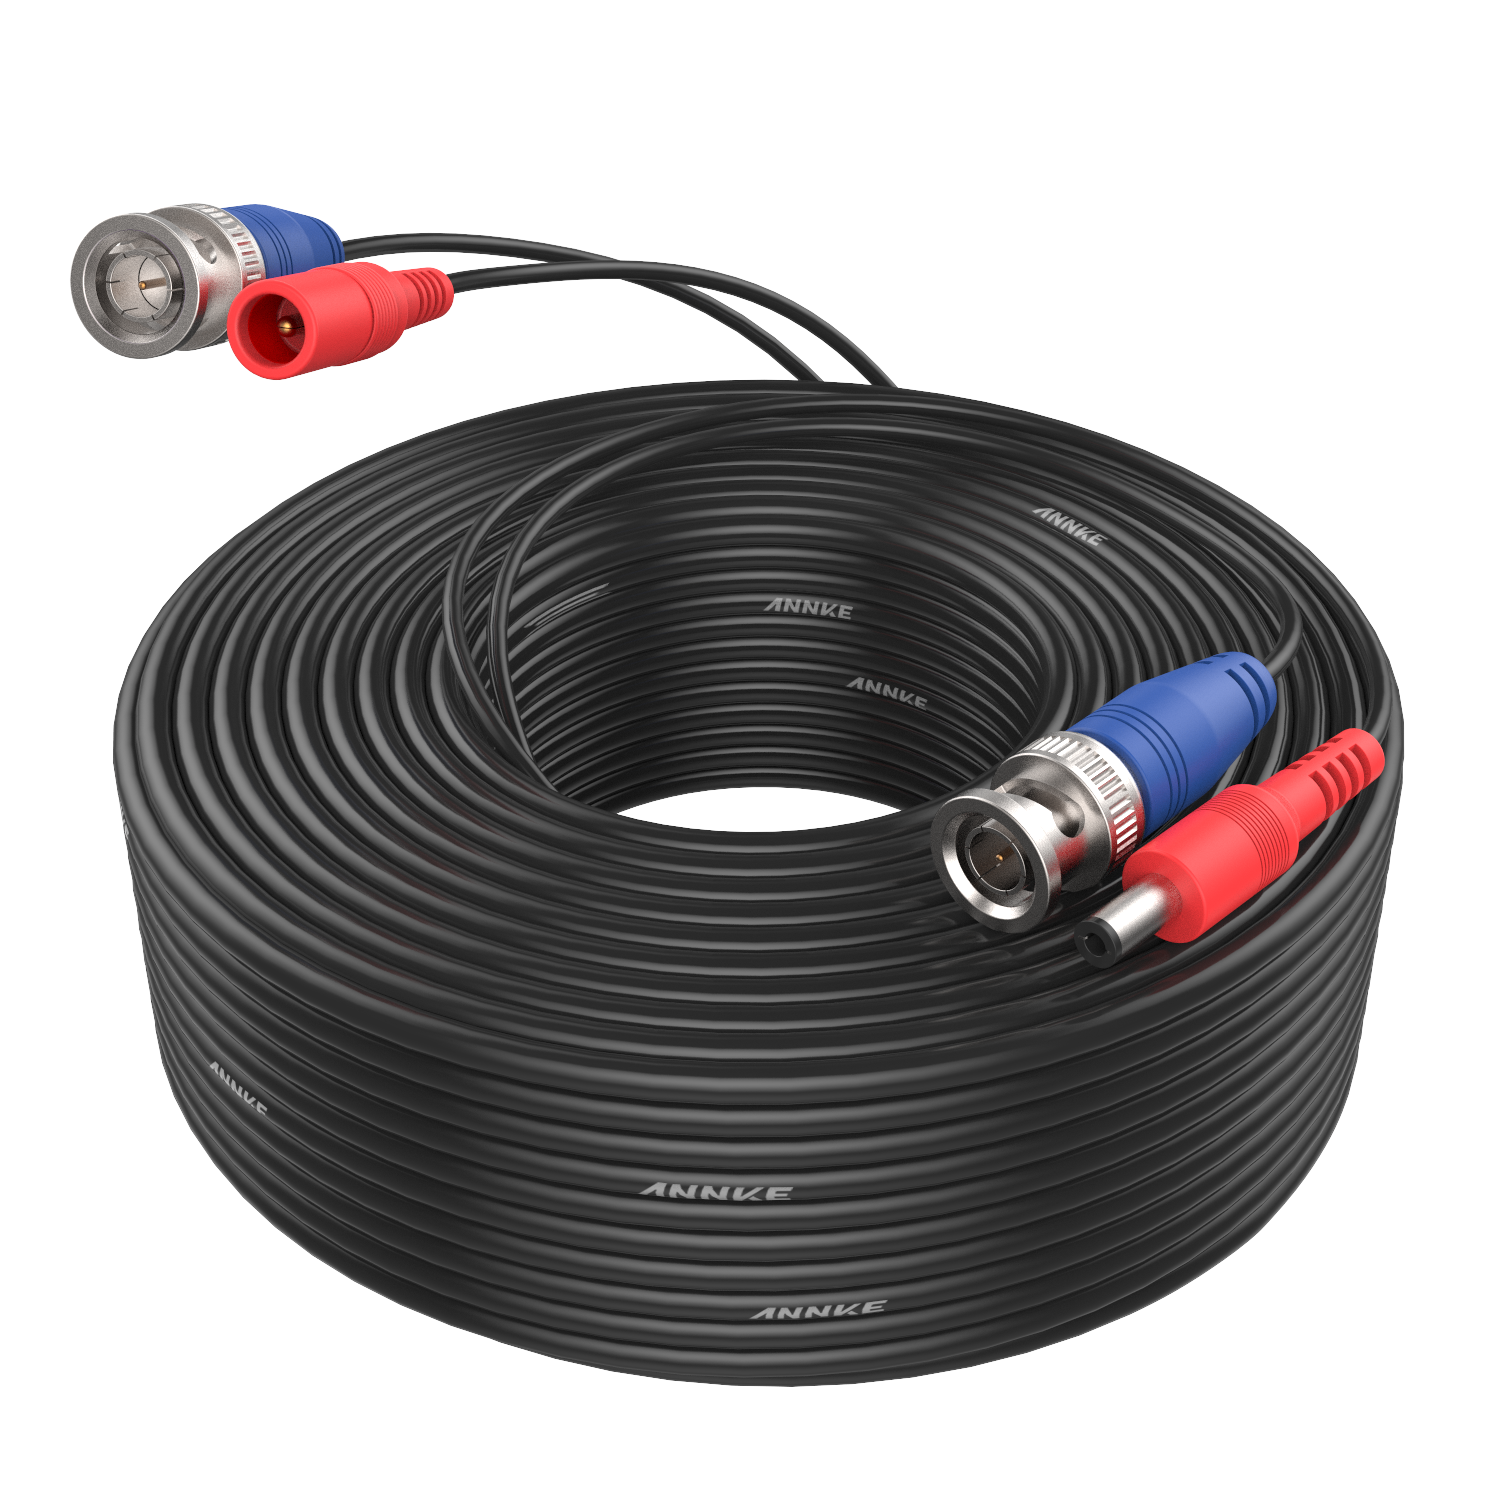 100 Feet (30 Meters) 2-in-1 Video Power Cable